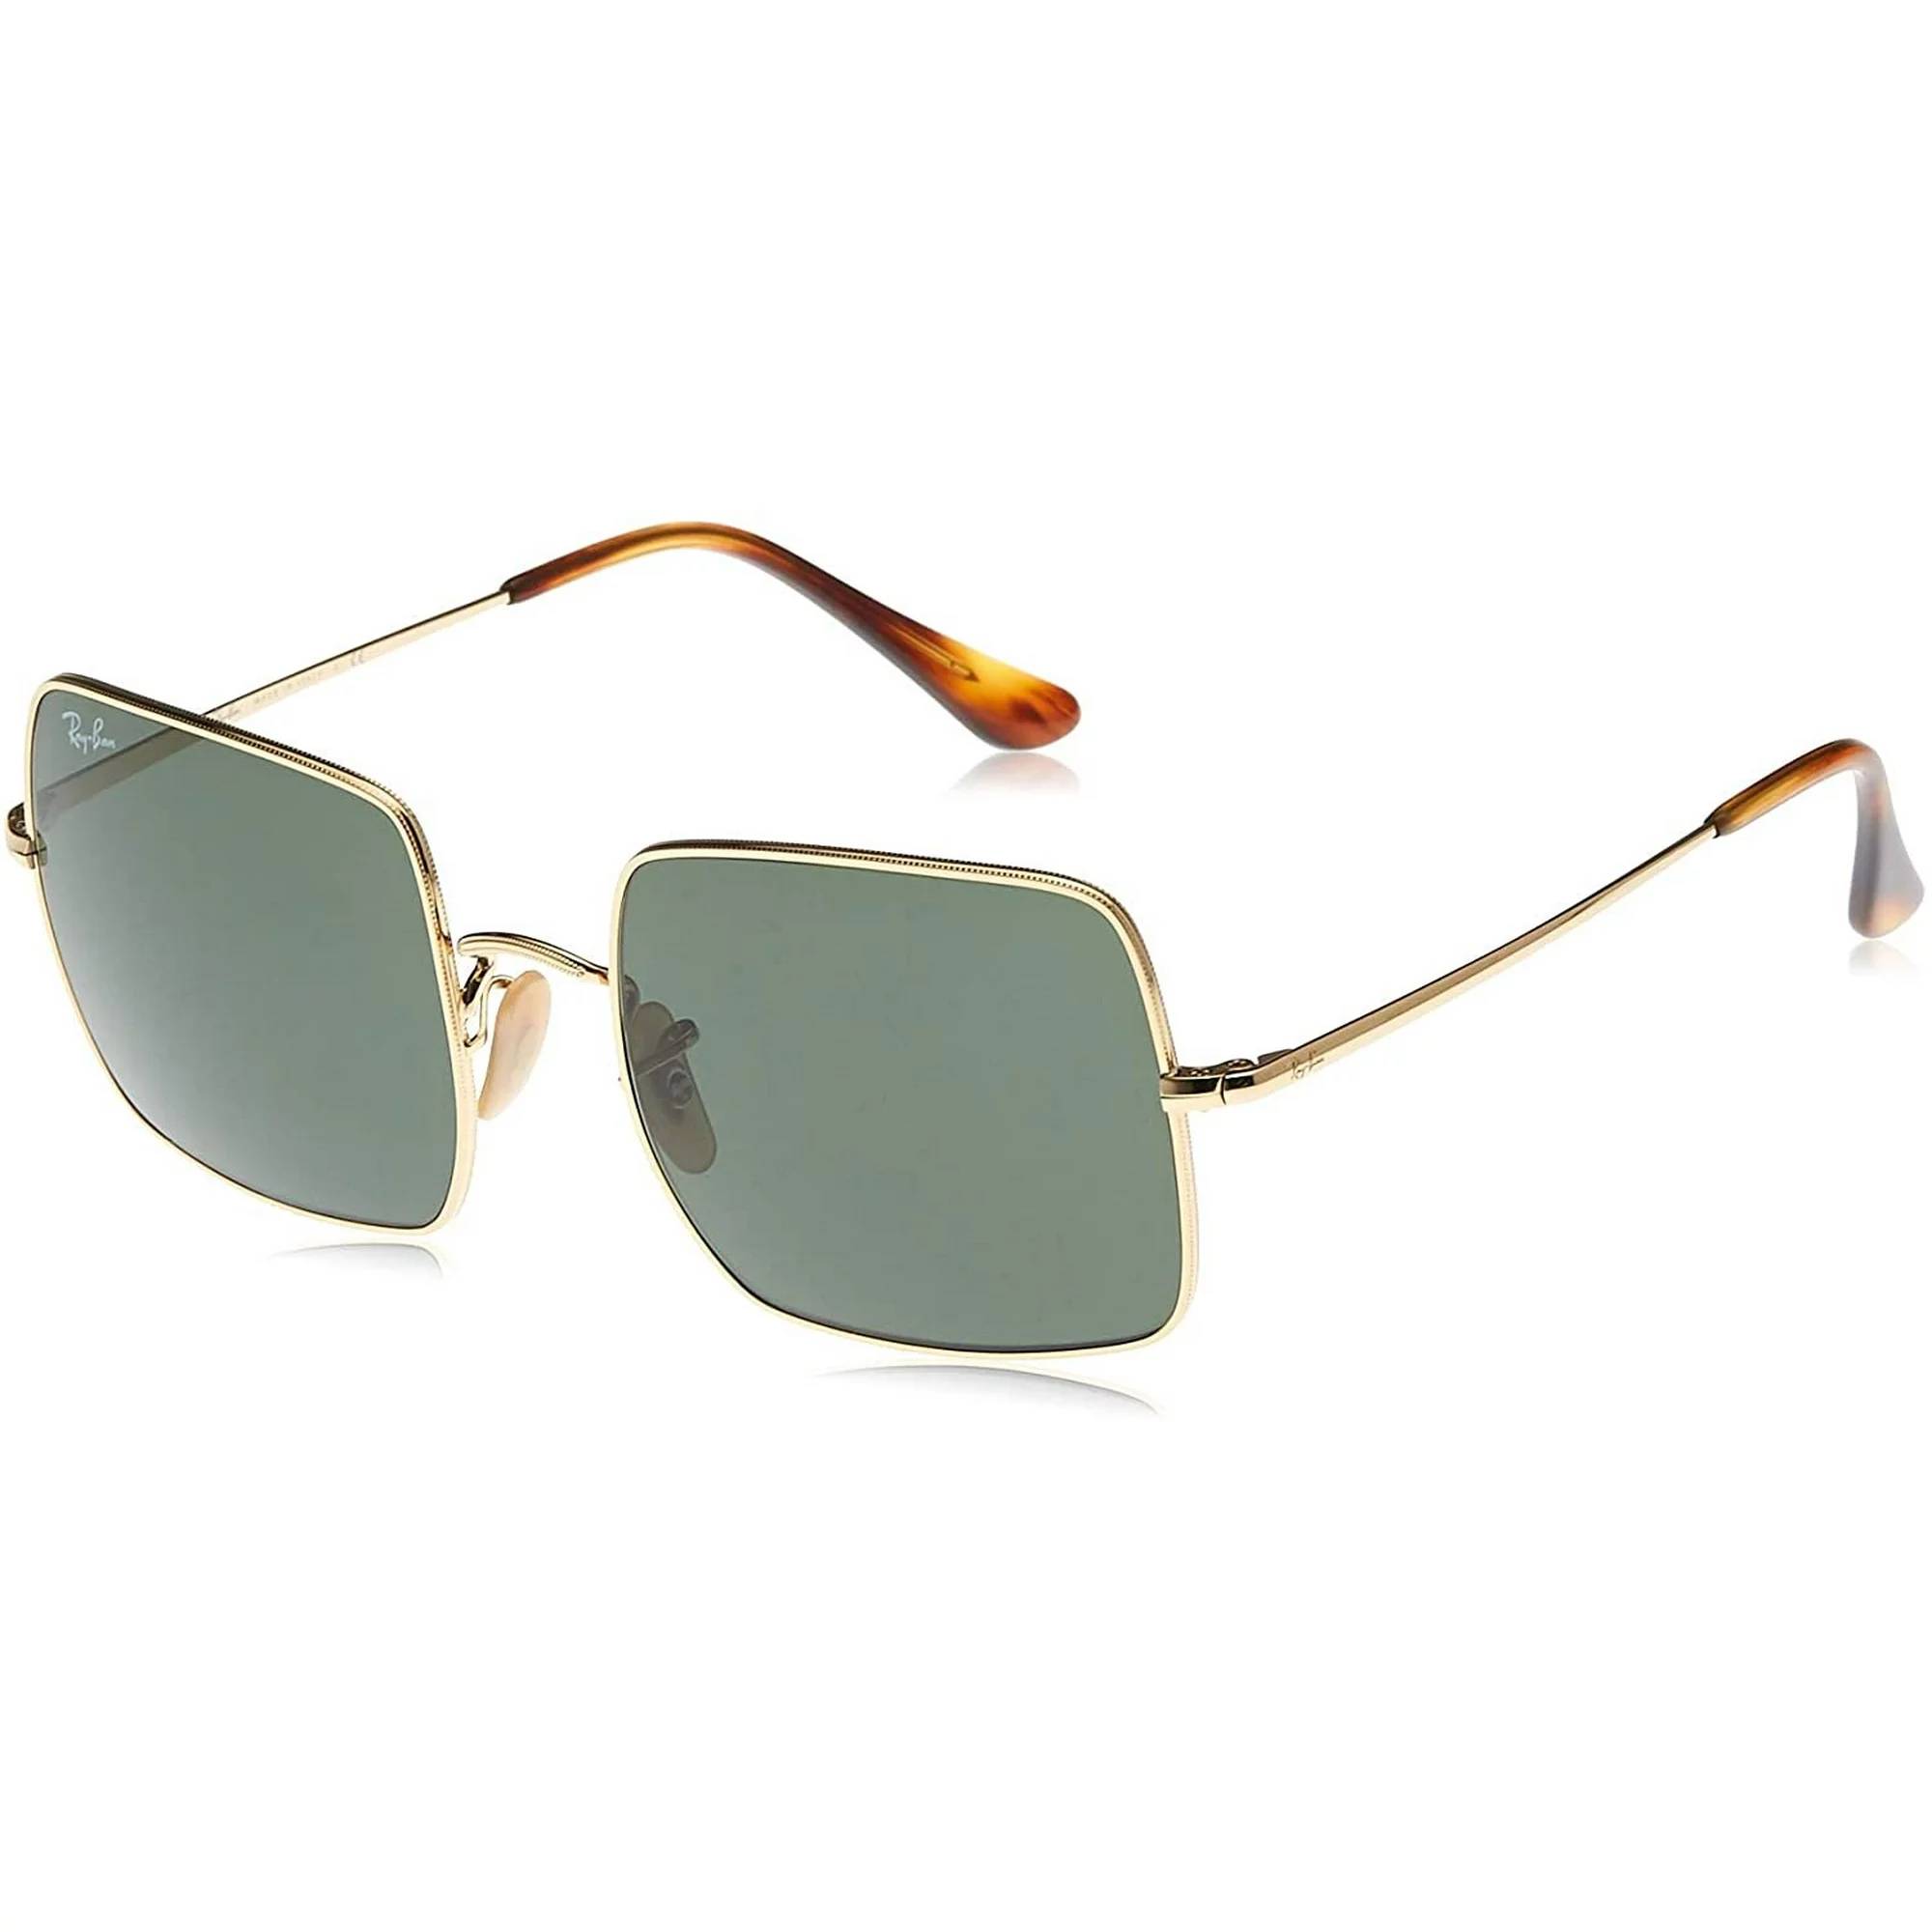 Ray-Ban Square Classic RB1971 914731 54 (RB197191473154)